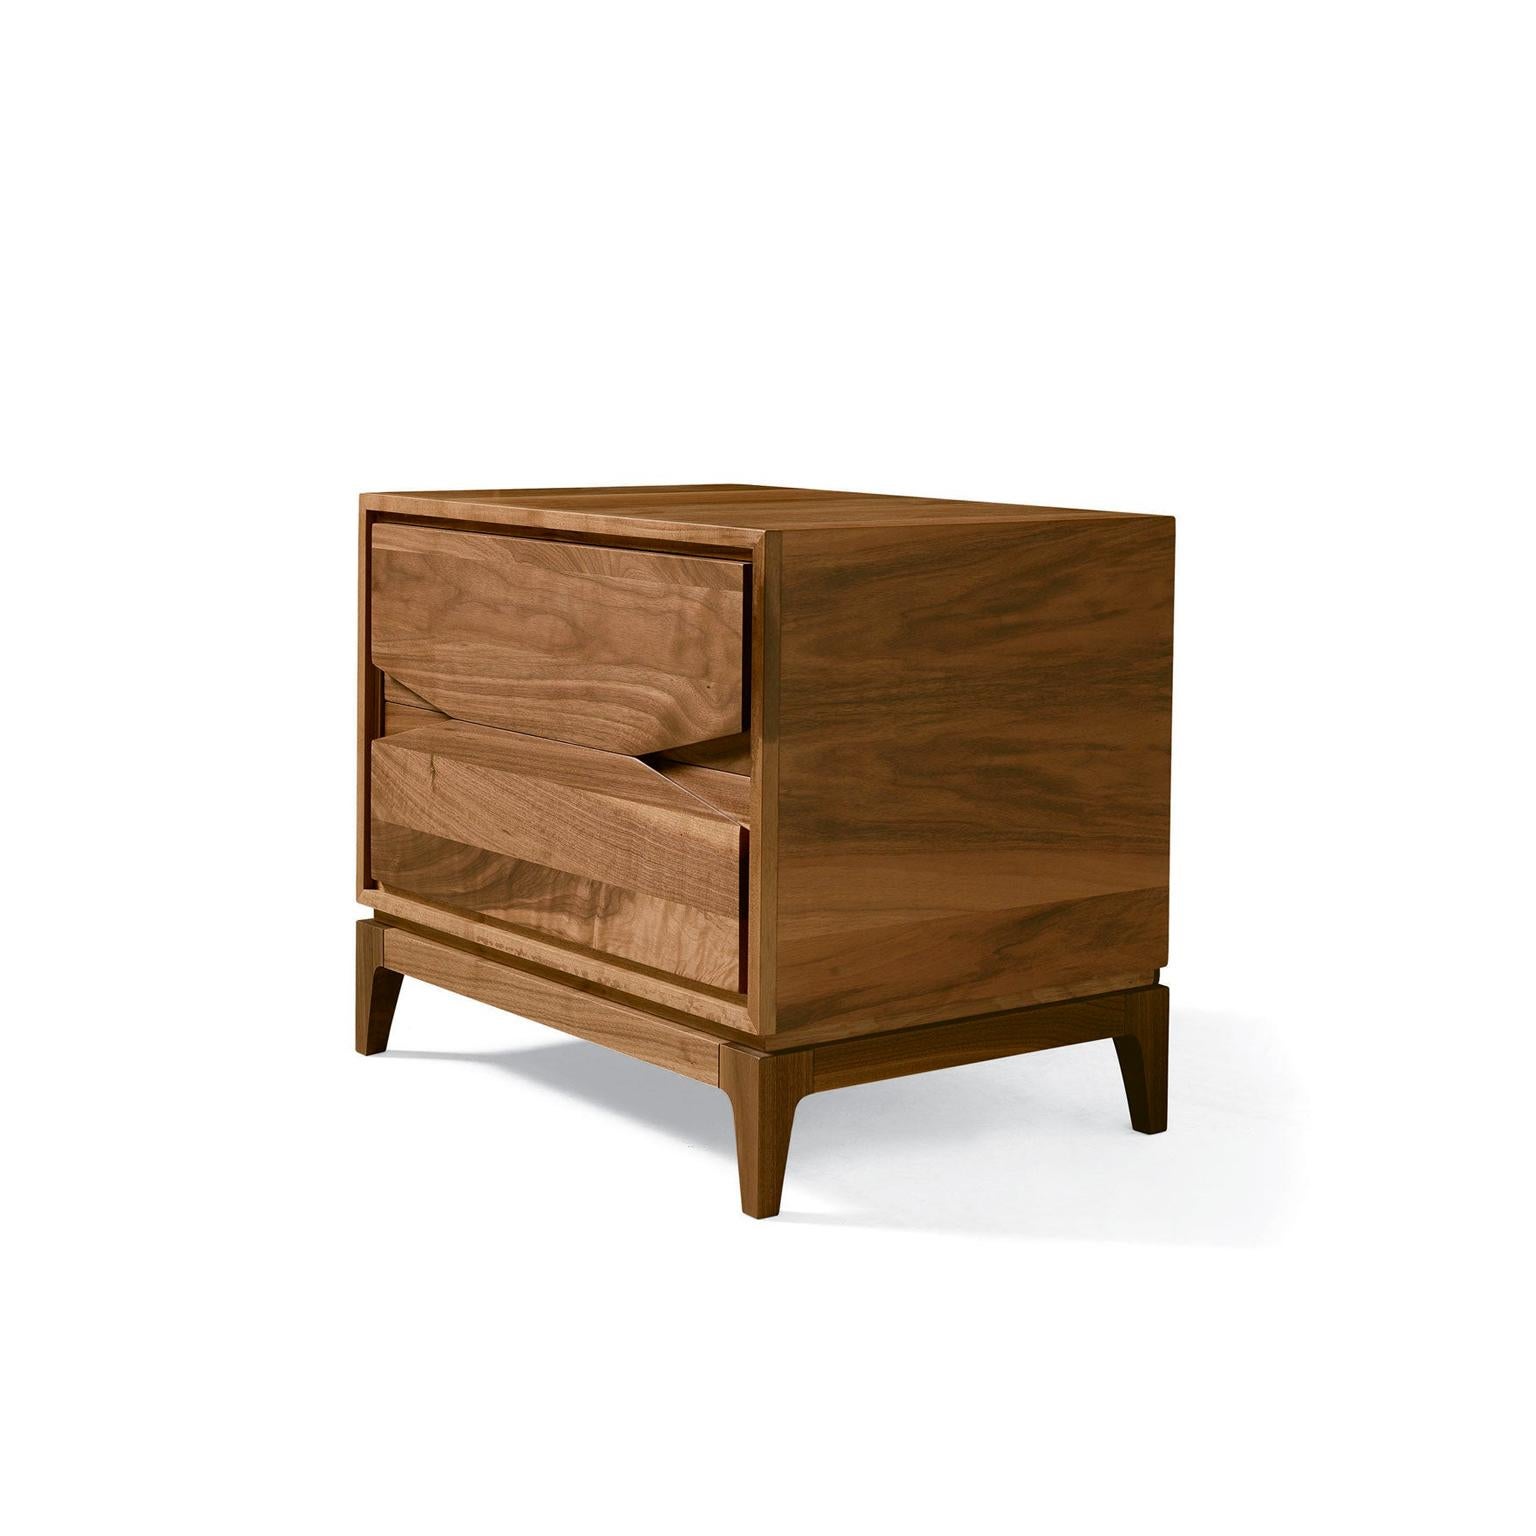 Its linear simplicity fits perfectly a contemporary, timeless interior design. You can pair it with the dresser M-130 which comes from the same collection. The bedside table it’s crafted by expert hands in Italy in premium walnut with the internal